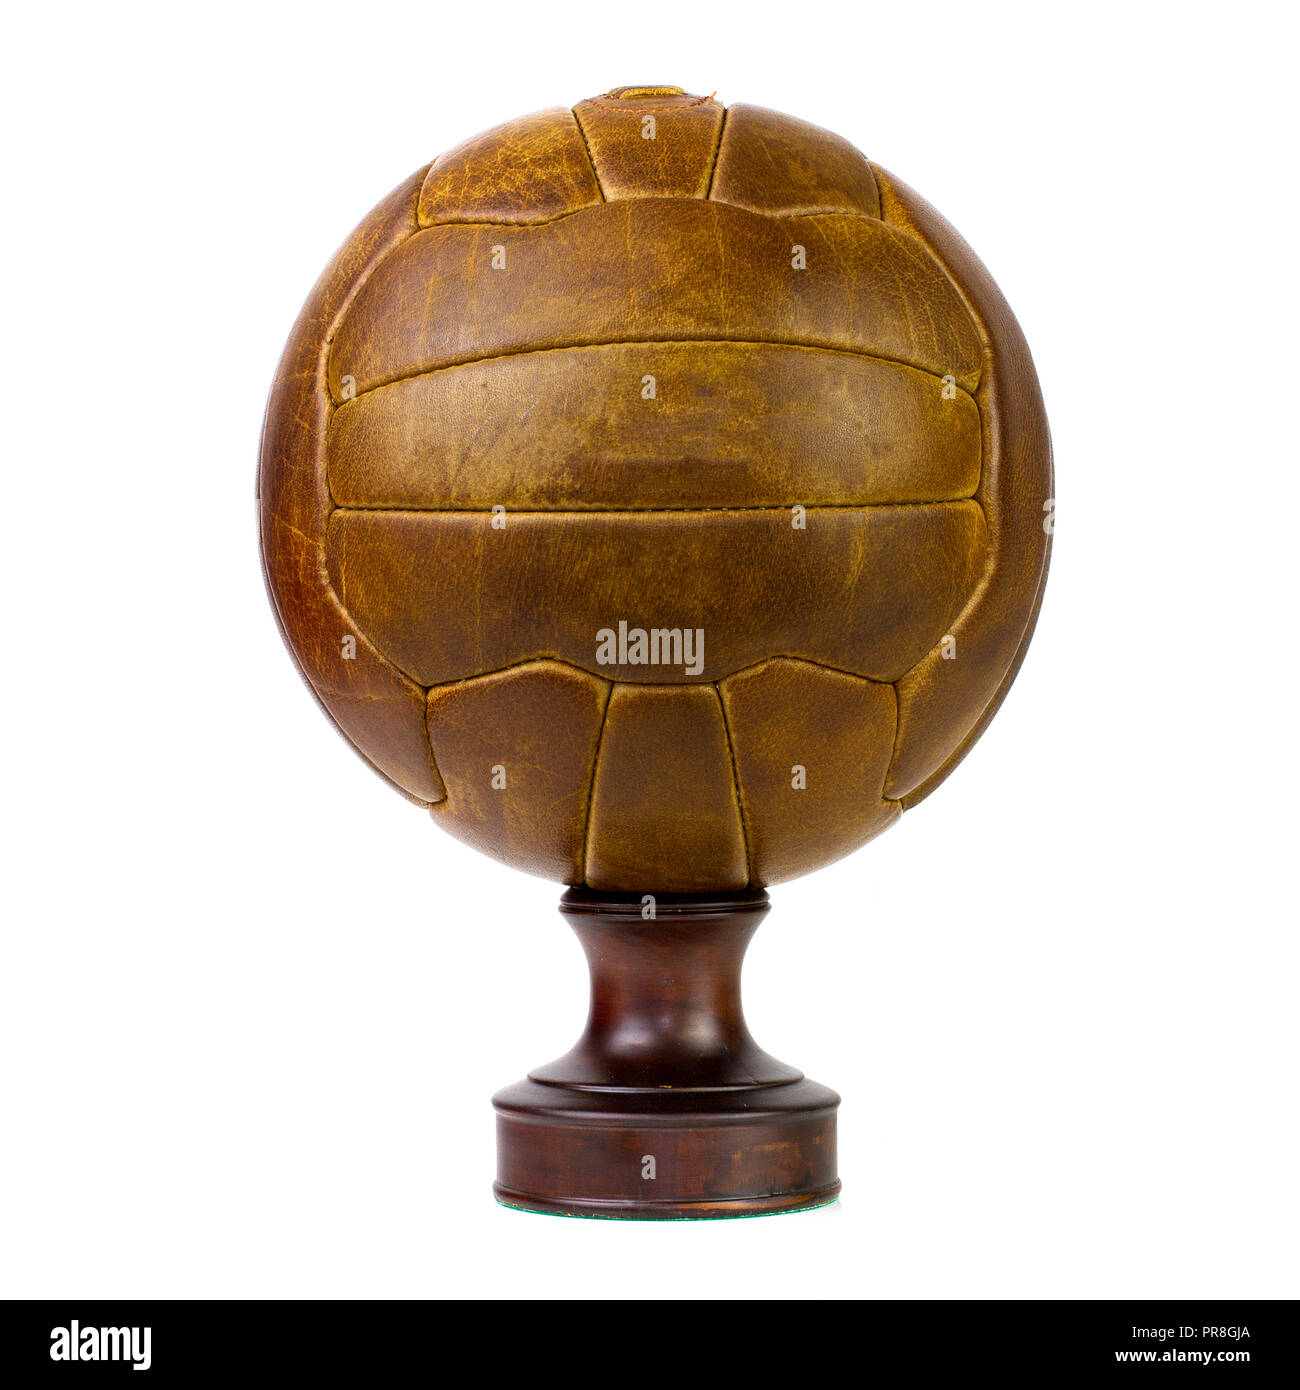 Vintage lace up leather football soccer ball Foto Stock